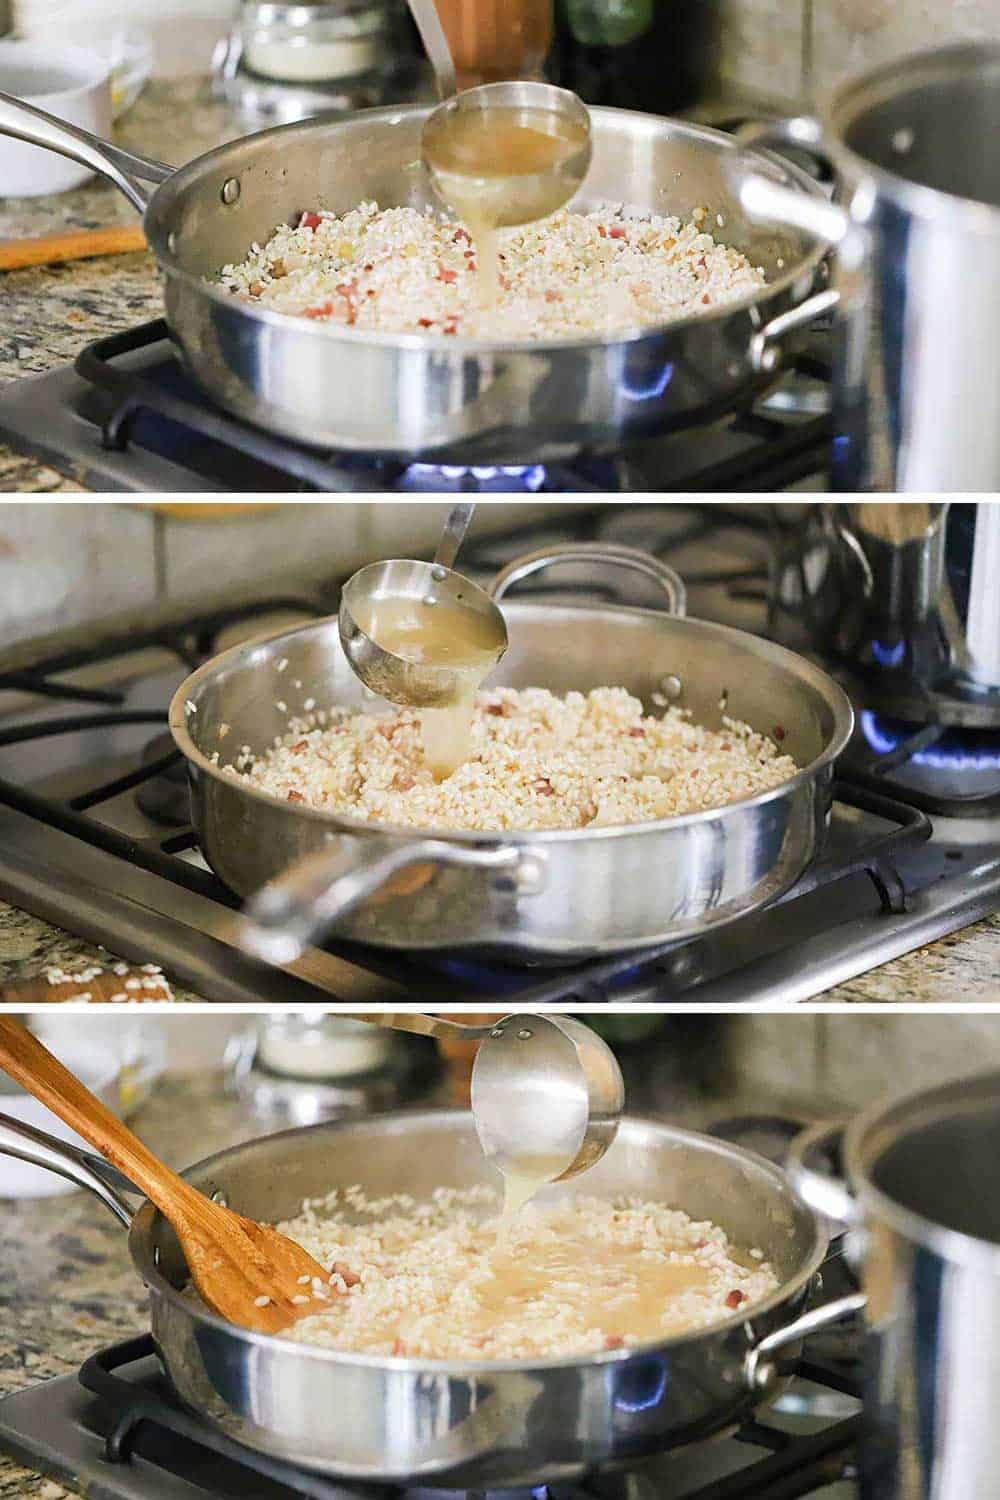 A large skillet filled with sautéd arborio rice with the broth being added, and then again with more broth being added, and then another cup of broth being added with the rice almost fully cooked and creamy in appearance. 